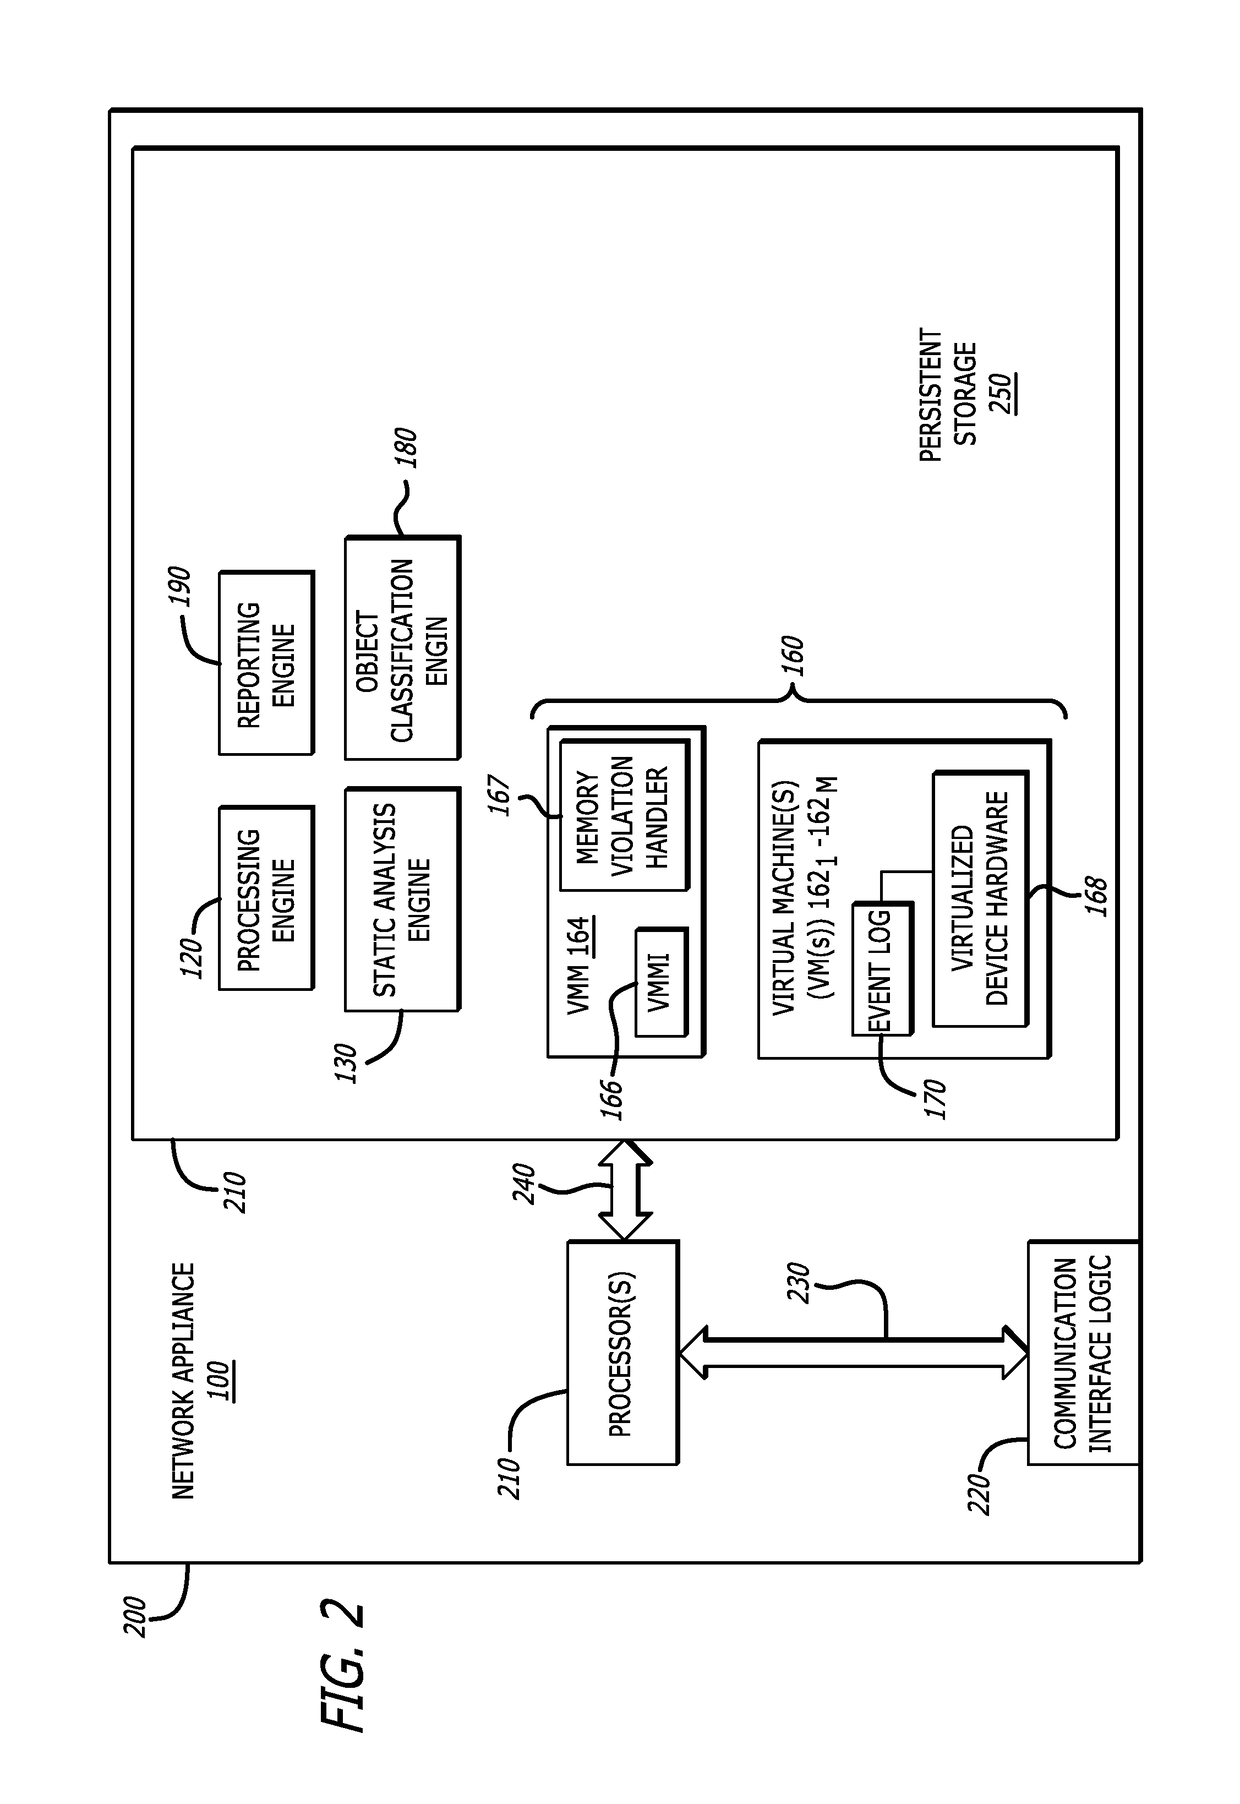 System and methods for advanced malware detection through placement of transition events